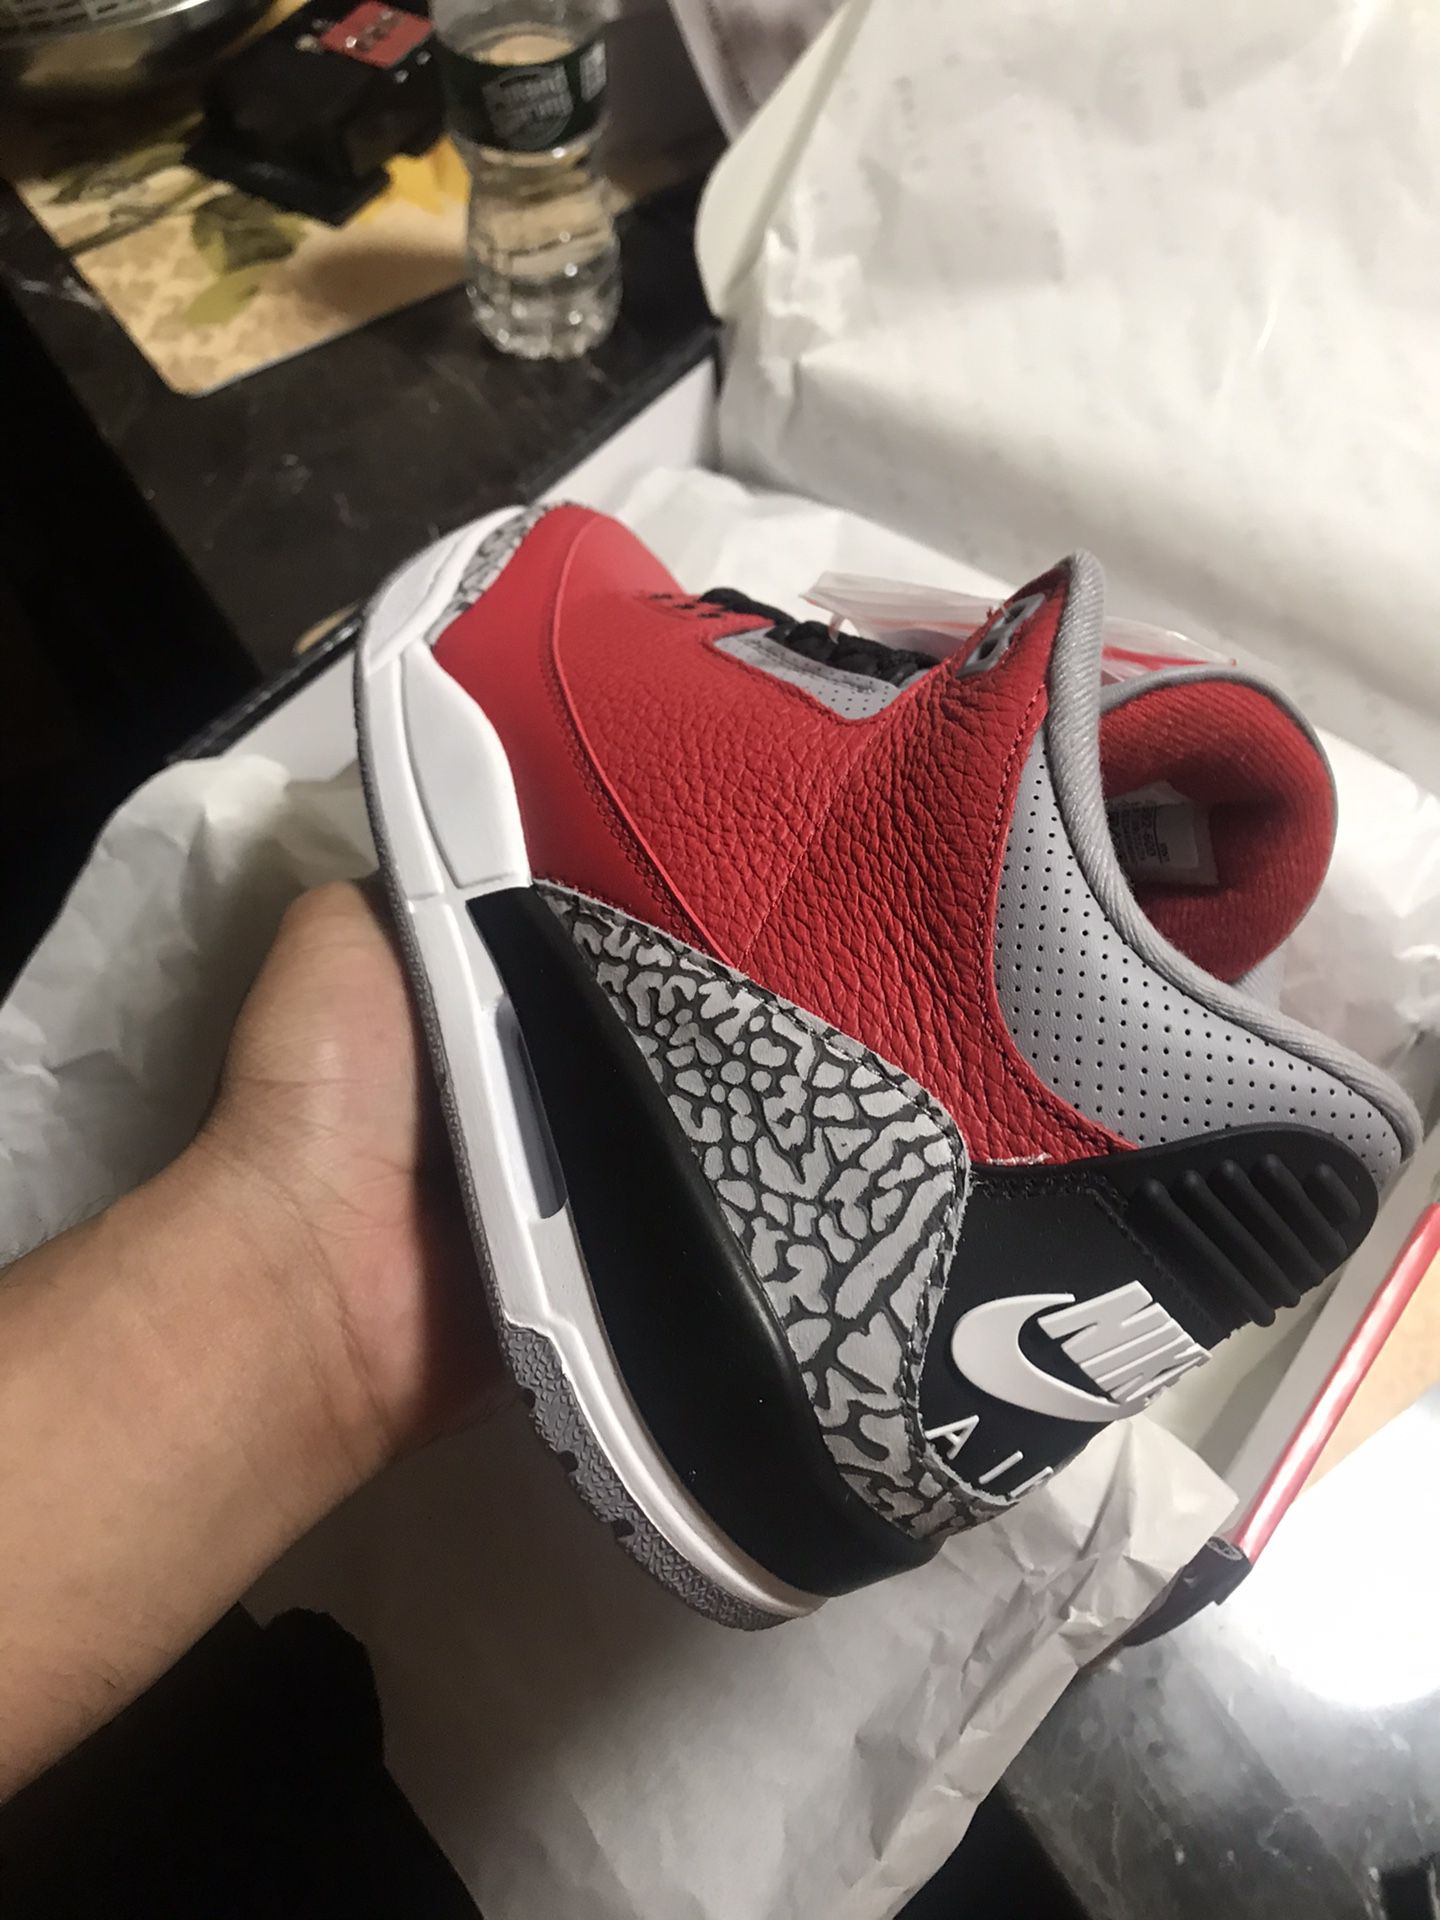 Jordan 3 red cements size 8.5 with receipt